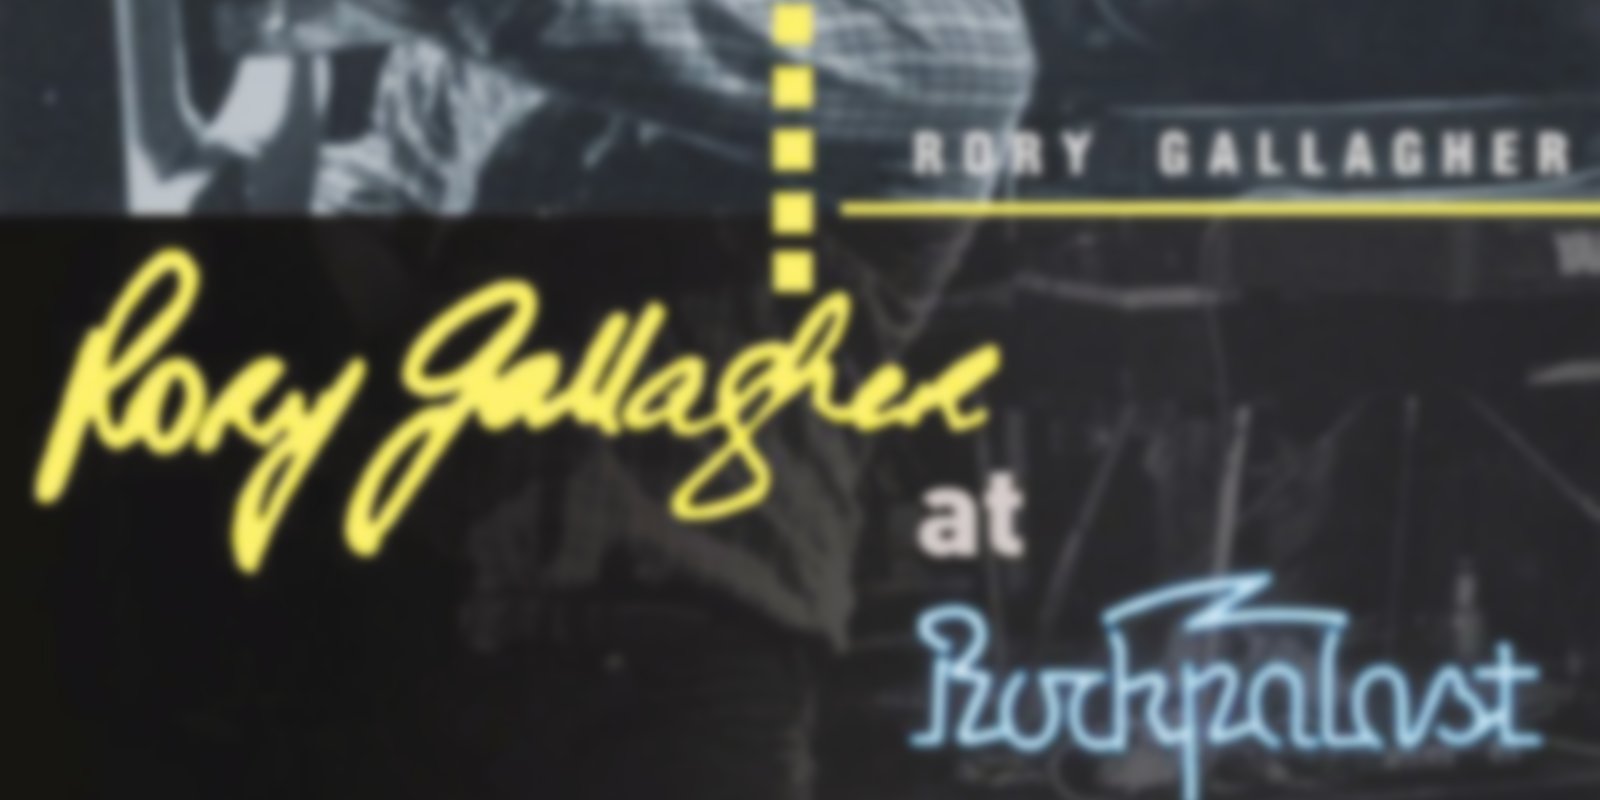 Rory Gallagher - Live at Rockpalast